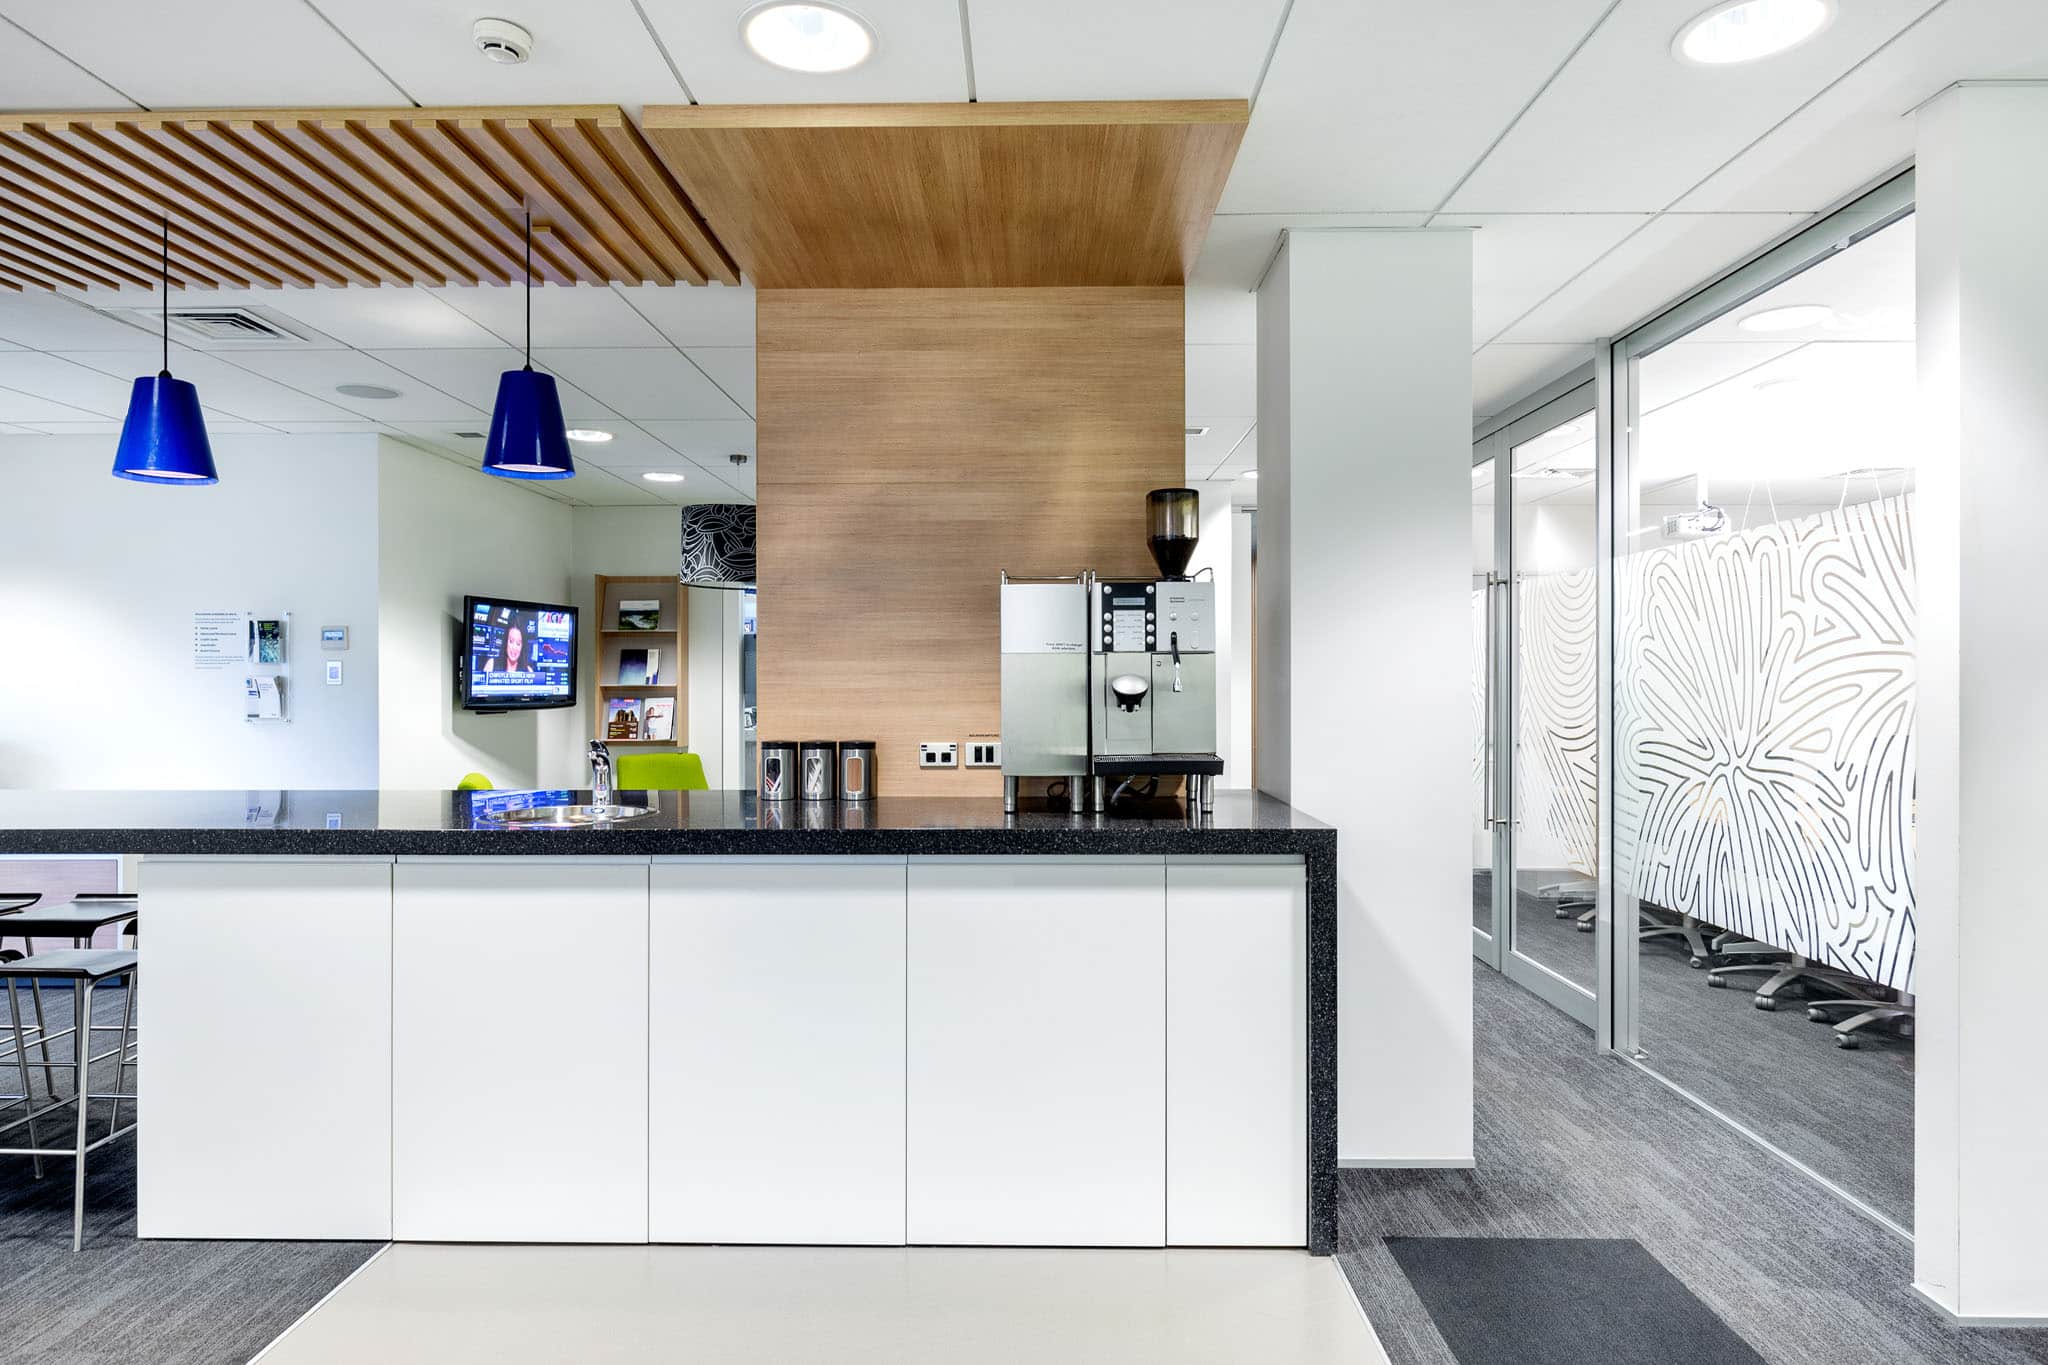 Architectural photography of BNZ bank in Queenstown New Zealand